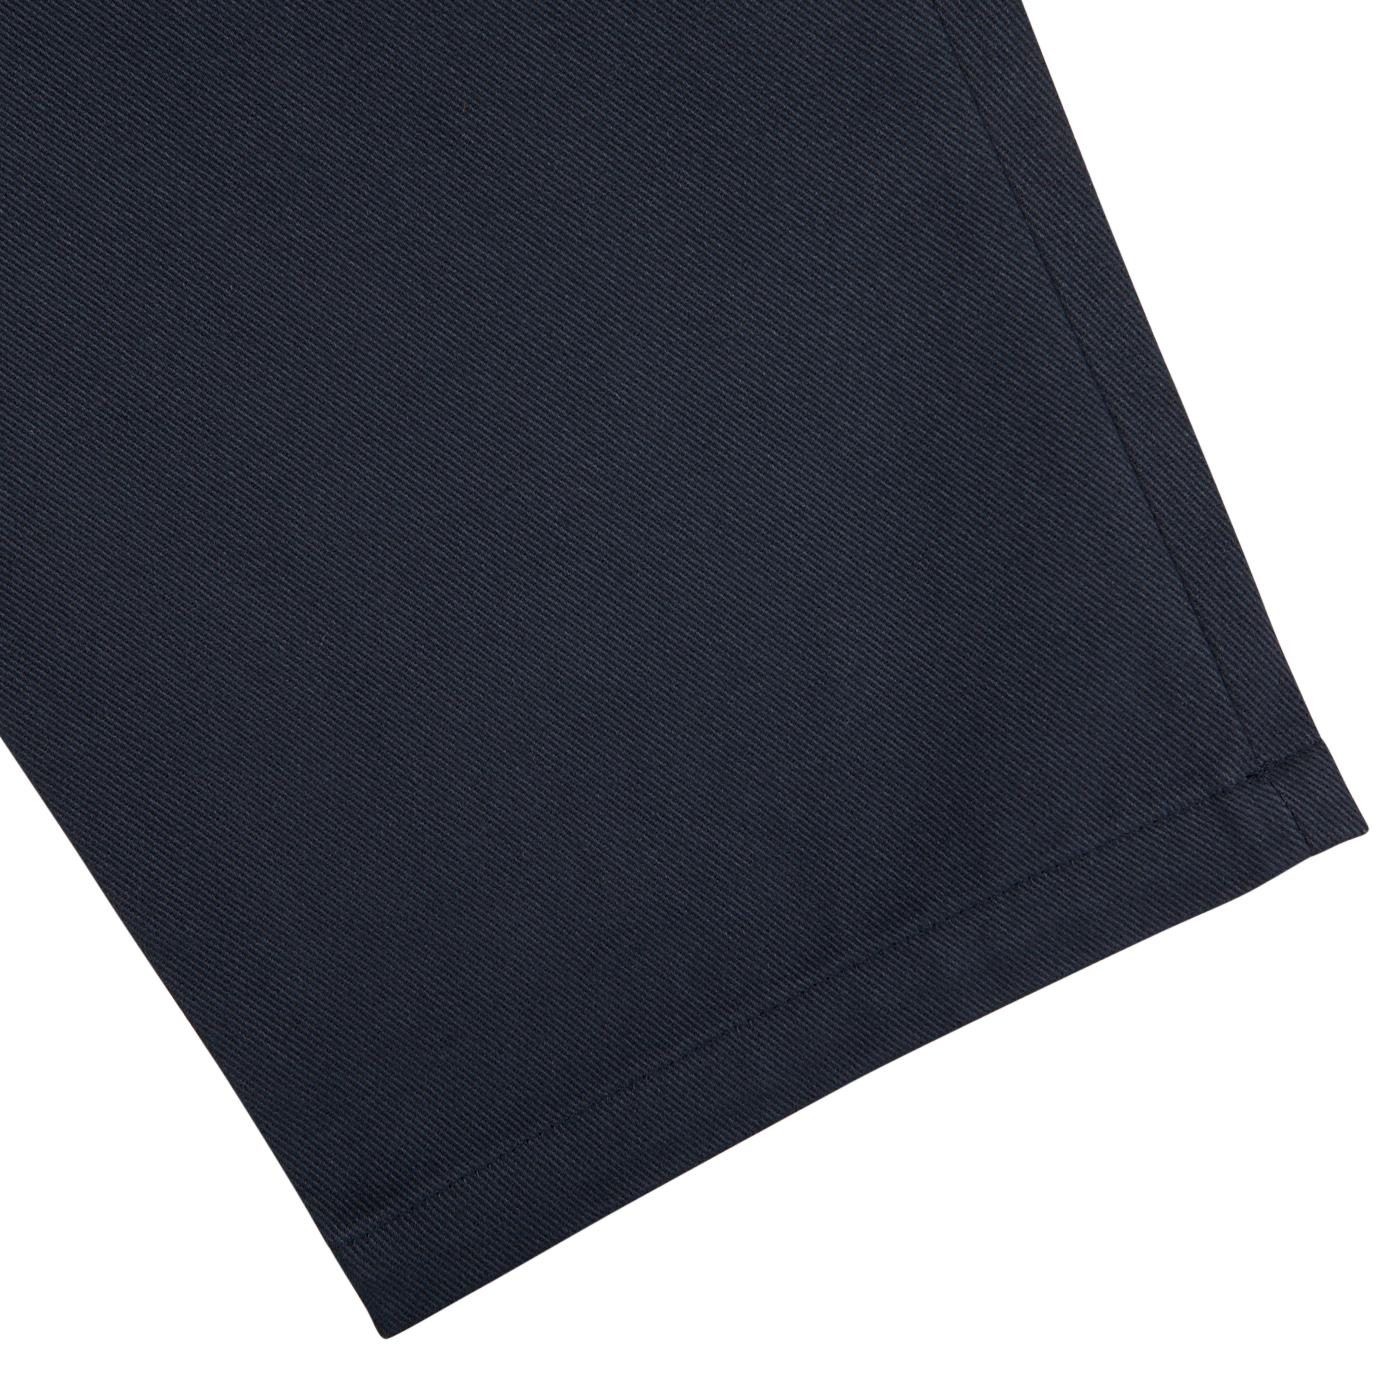 Close-up of De Bonne Facture Navy Blue Heavy Cotton Drill Balloon Trousers fabric texture with visible weave patterns on a light background.